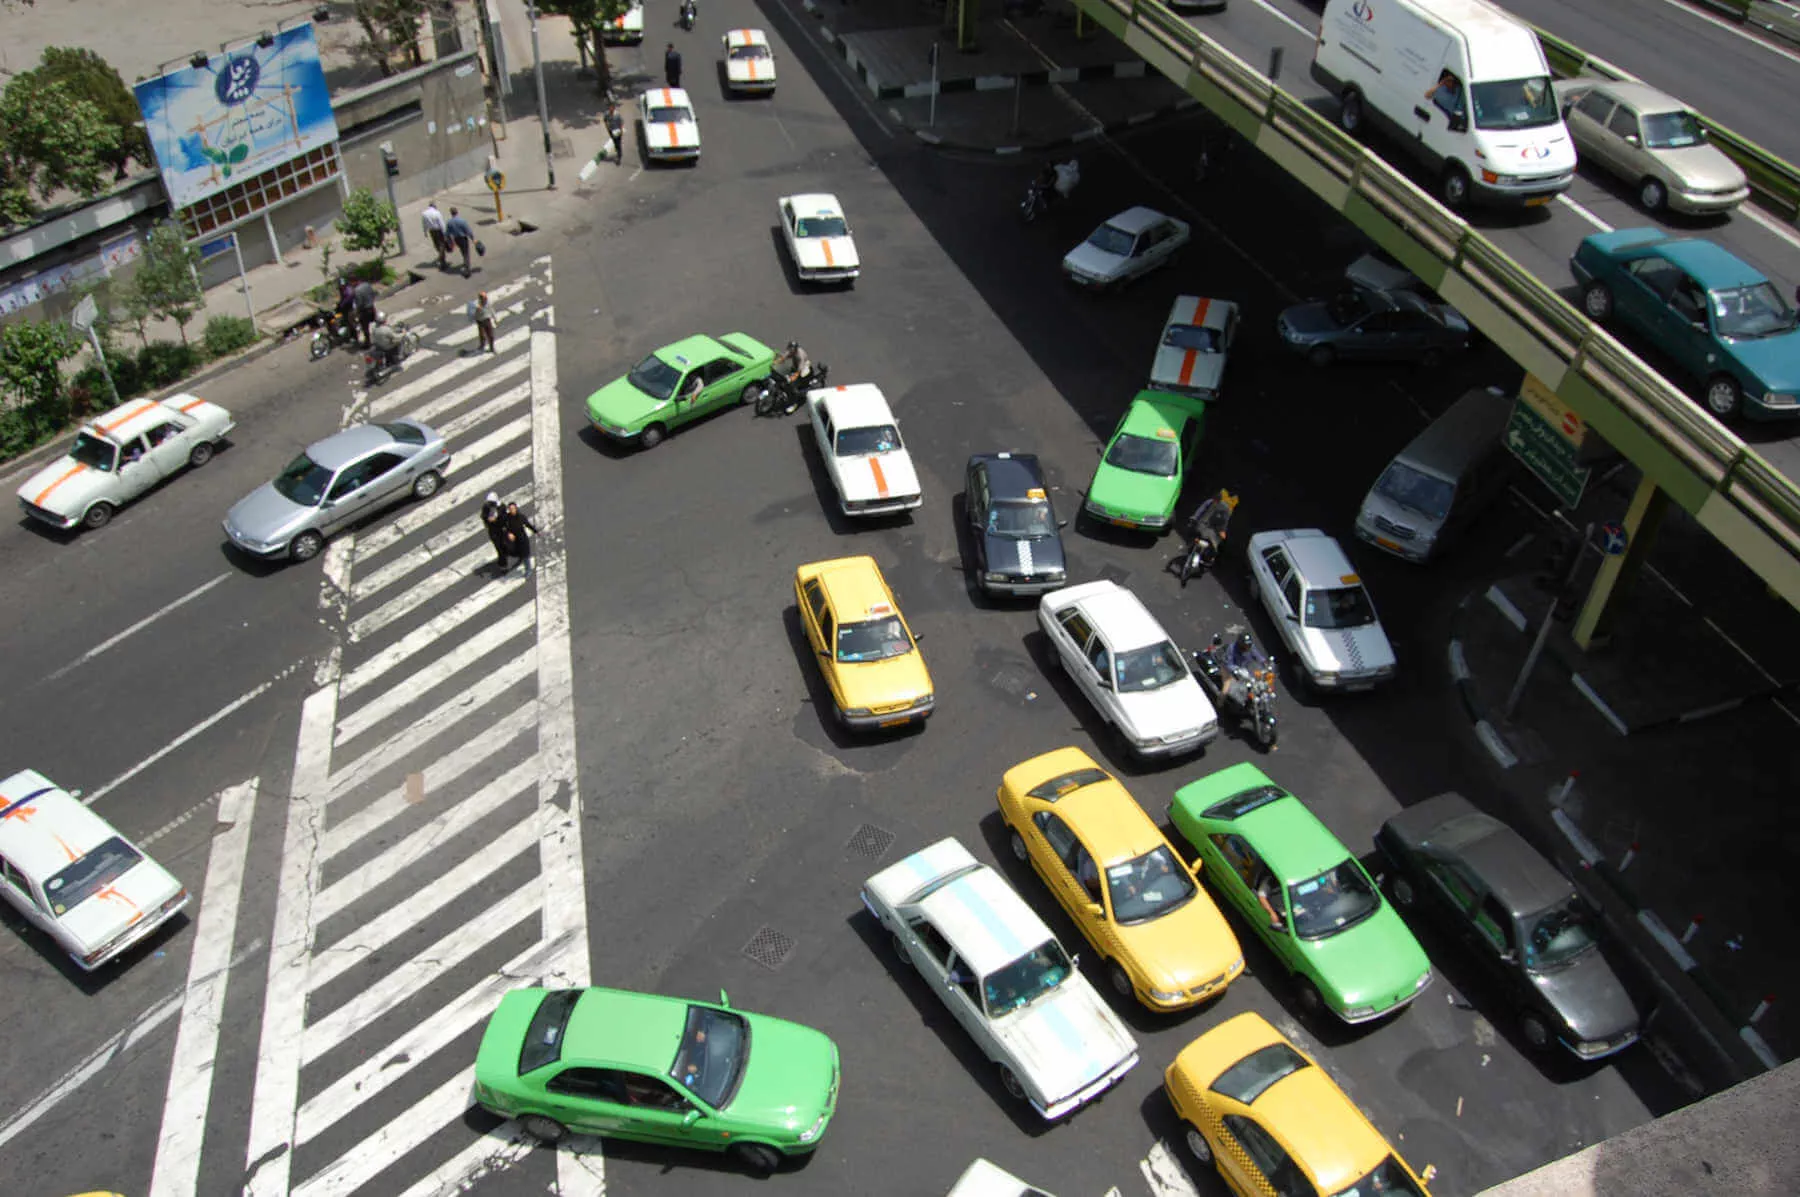 Cars merge through intersections without traffic lights as if that’s the norm. Surprisingly...it works